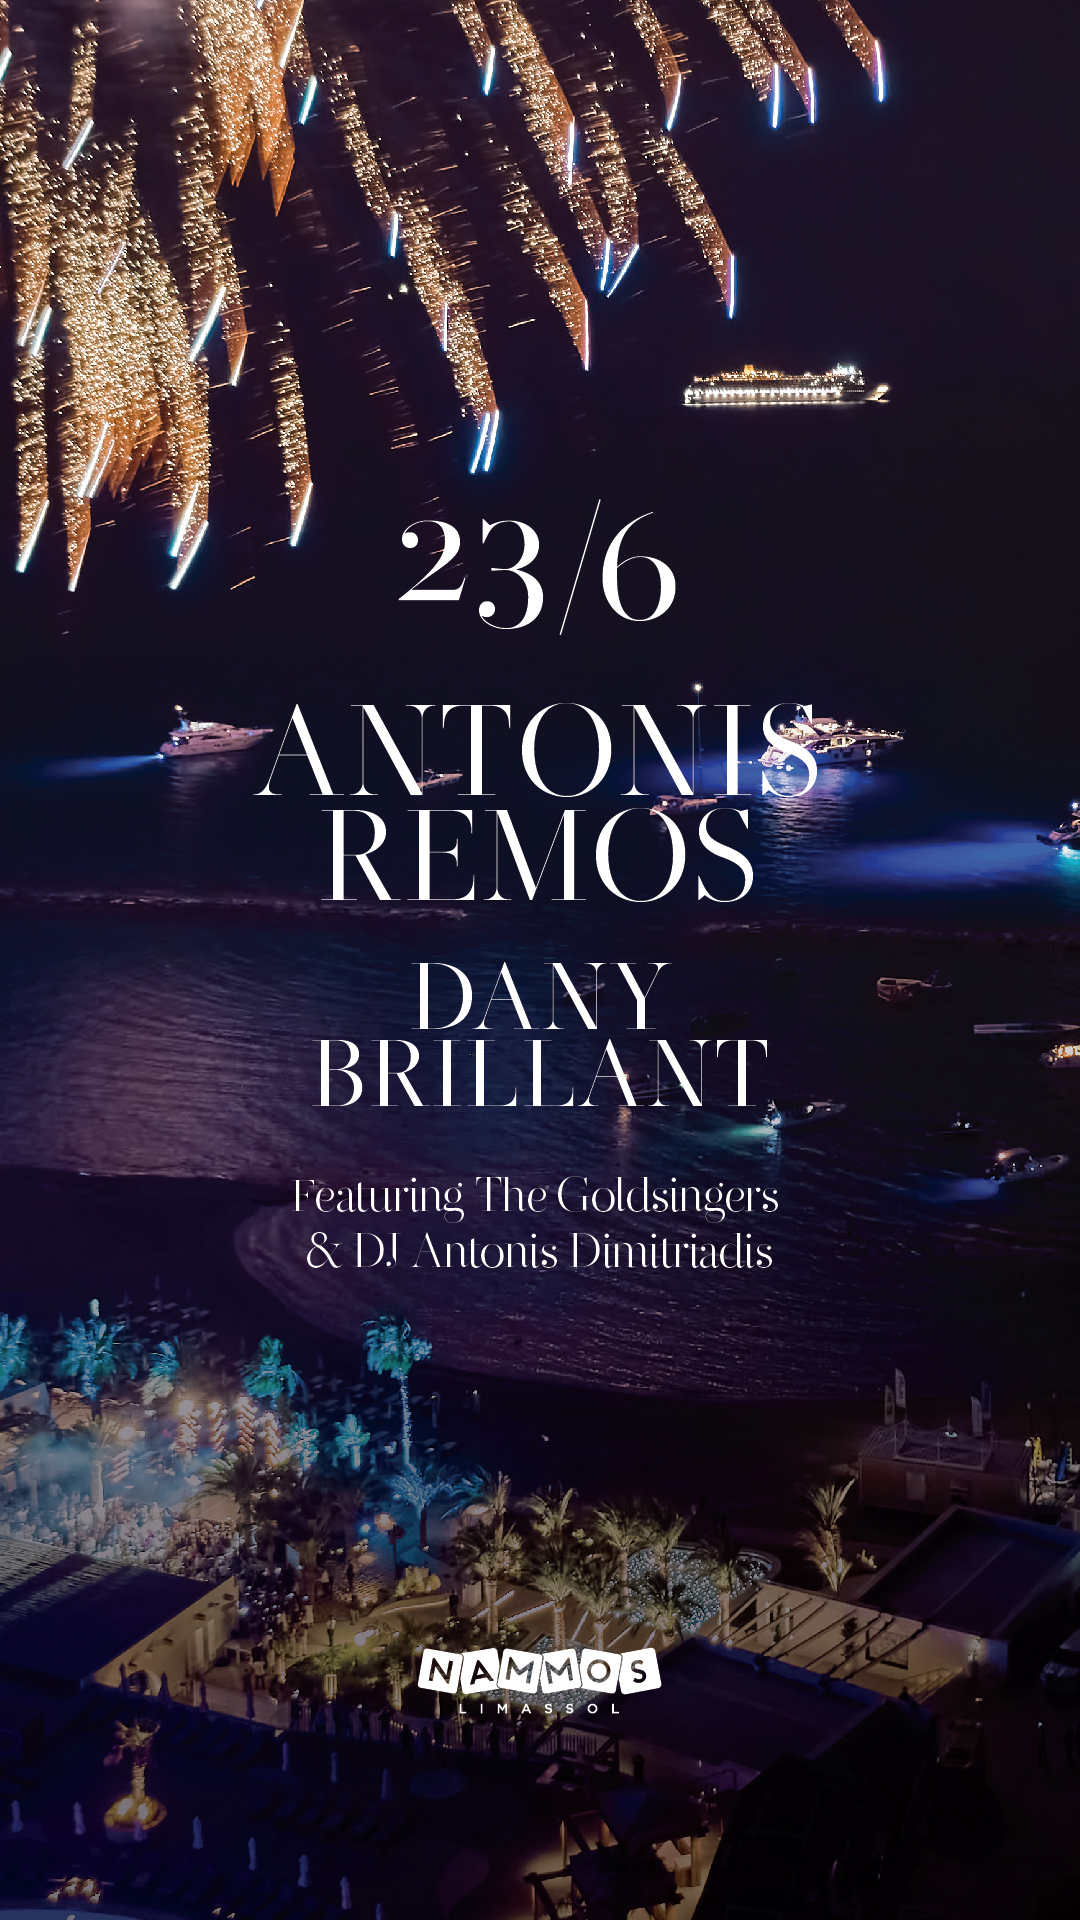 Antonis Remos and Dany Brilliant Concert Banner for 23/6/2023 at Nammos Limassol